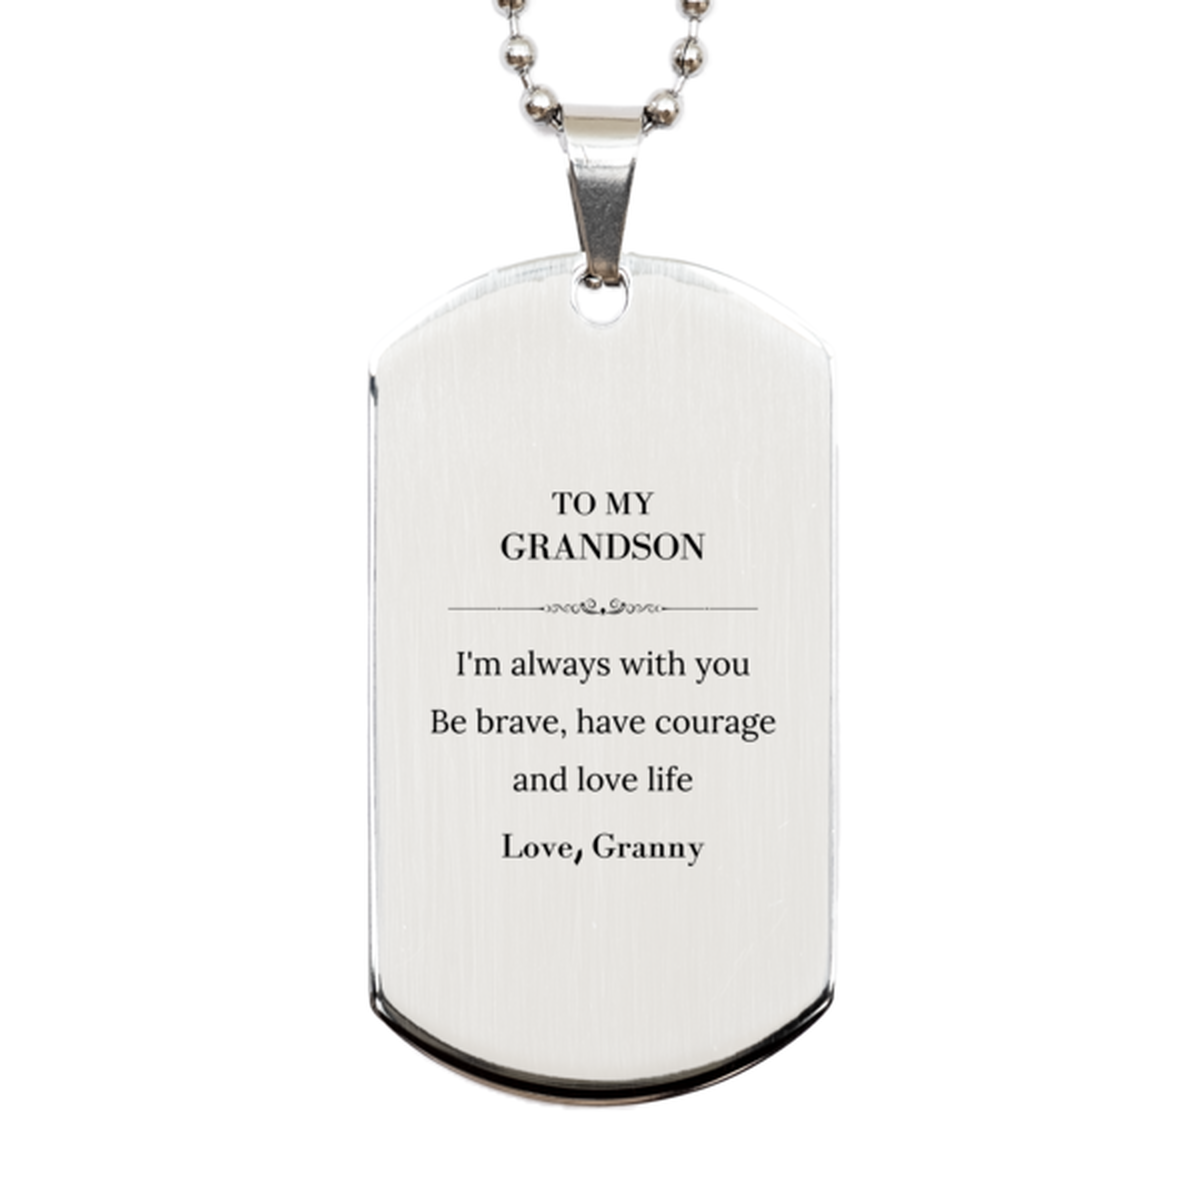 To My Grandson Gifts from Granny, Unique Silver Dog Tag Inspirational Christmas Birthday Graduation Gifts for Grandson I'm always with you. Be brave, have courage and love life. Love, Granny